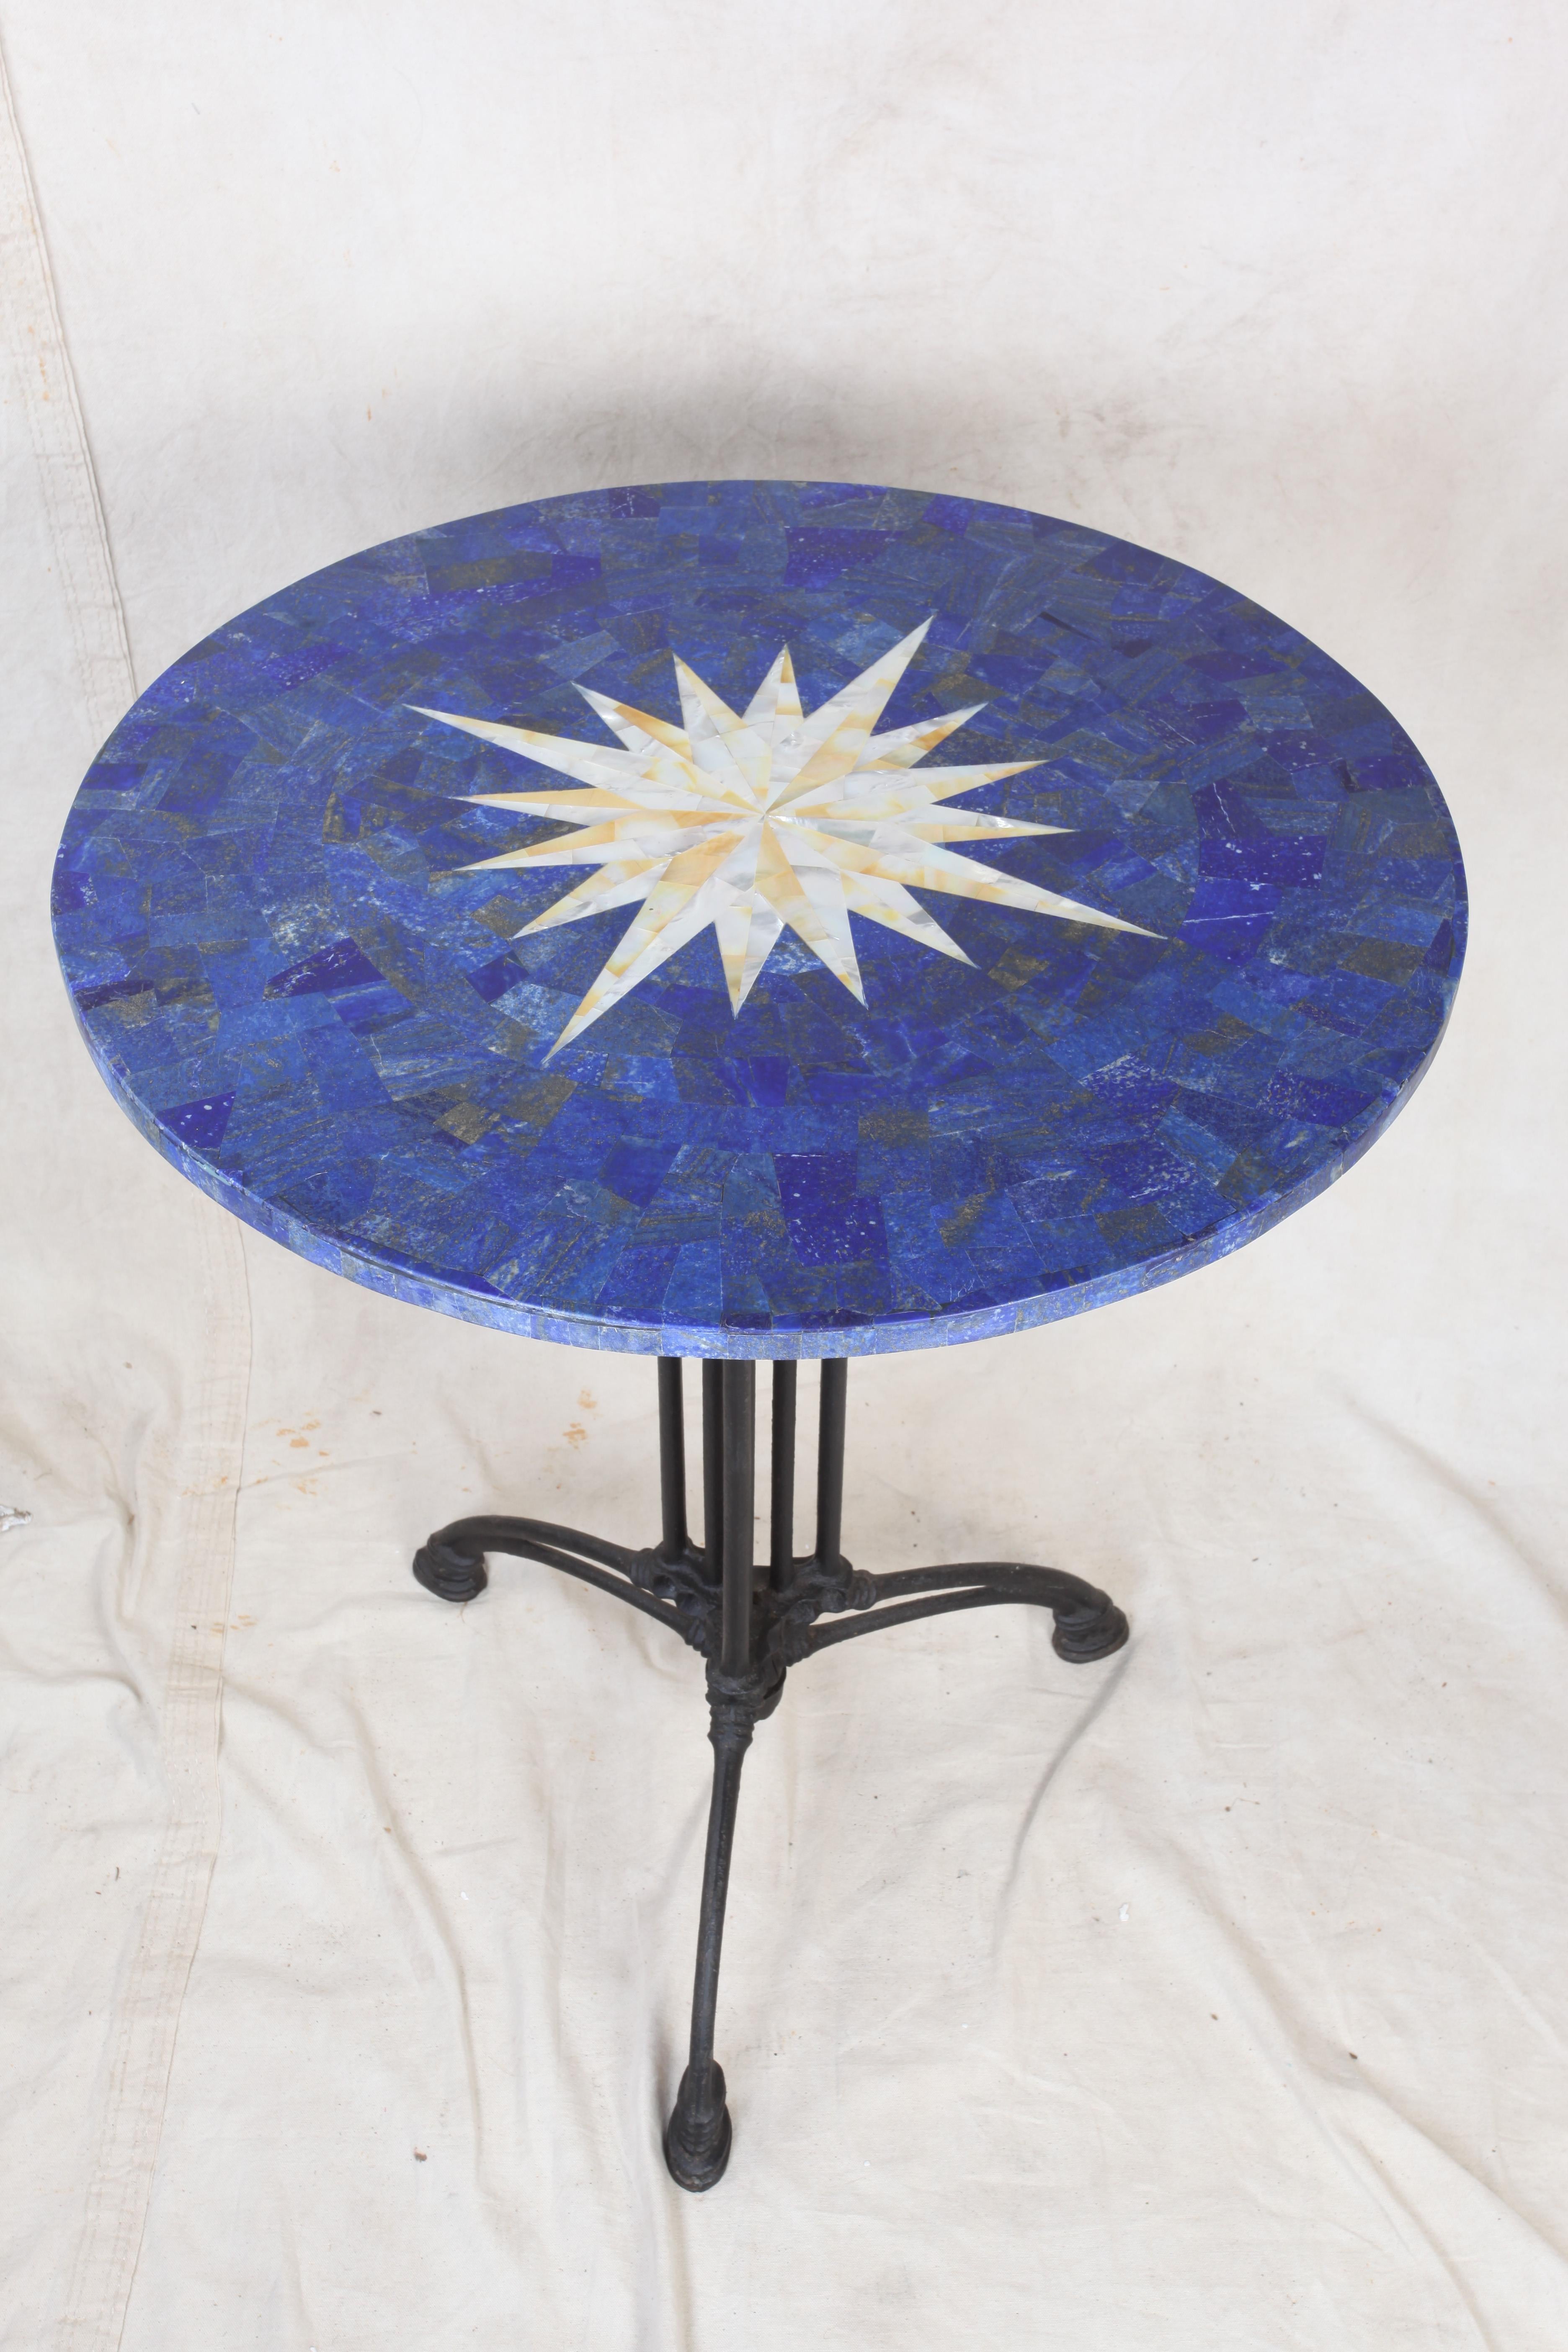 A lapis lazuli pietra dura table top with an inlay compass rose in mother of pearl. Sits on a powder coated aluminum base. Can be used inside or outside.